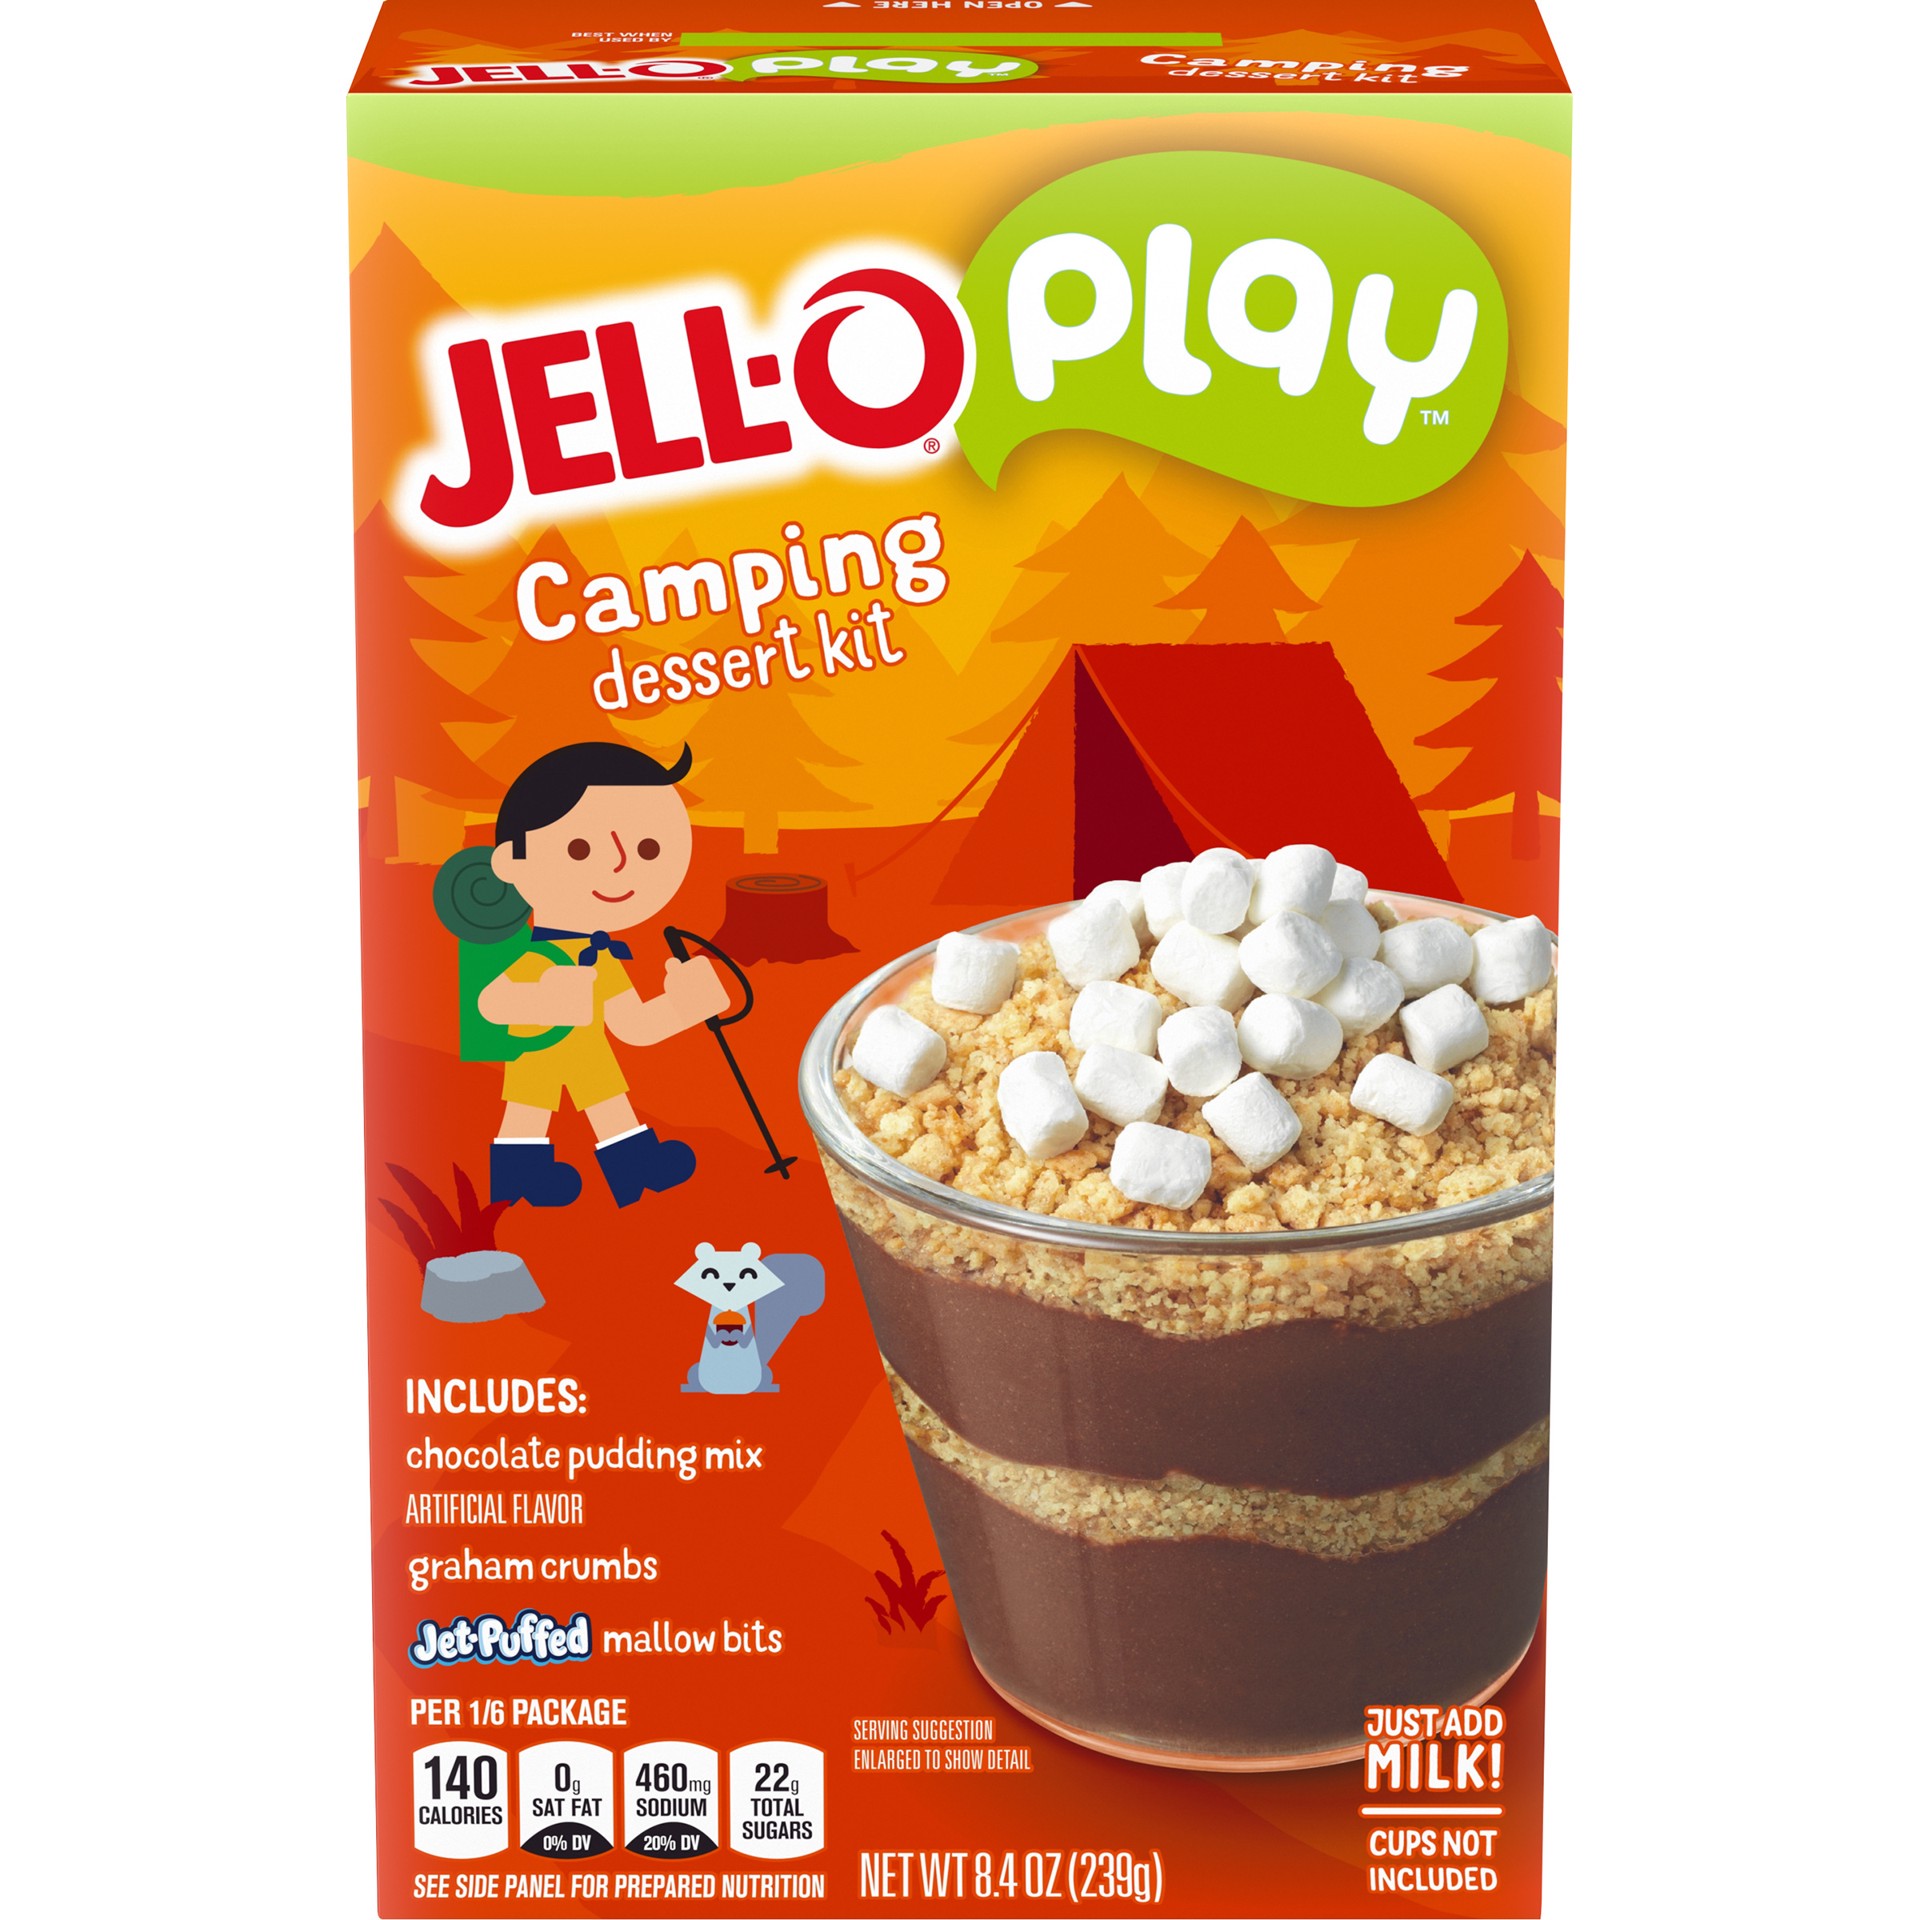 slide 5 of 11, Jell-O Play Camping Dessert Kit with Chocolate Pudding Mix, Graham Crumbs & Jet-Puffed Marshmallow Bits, 8.4 oz Box, 8.4 oz